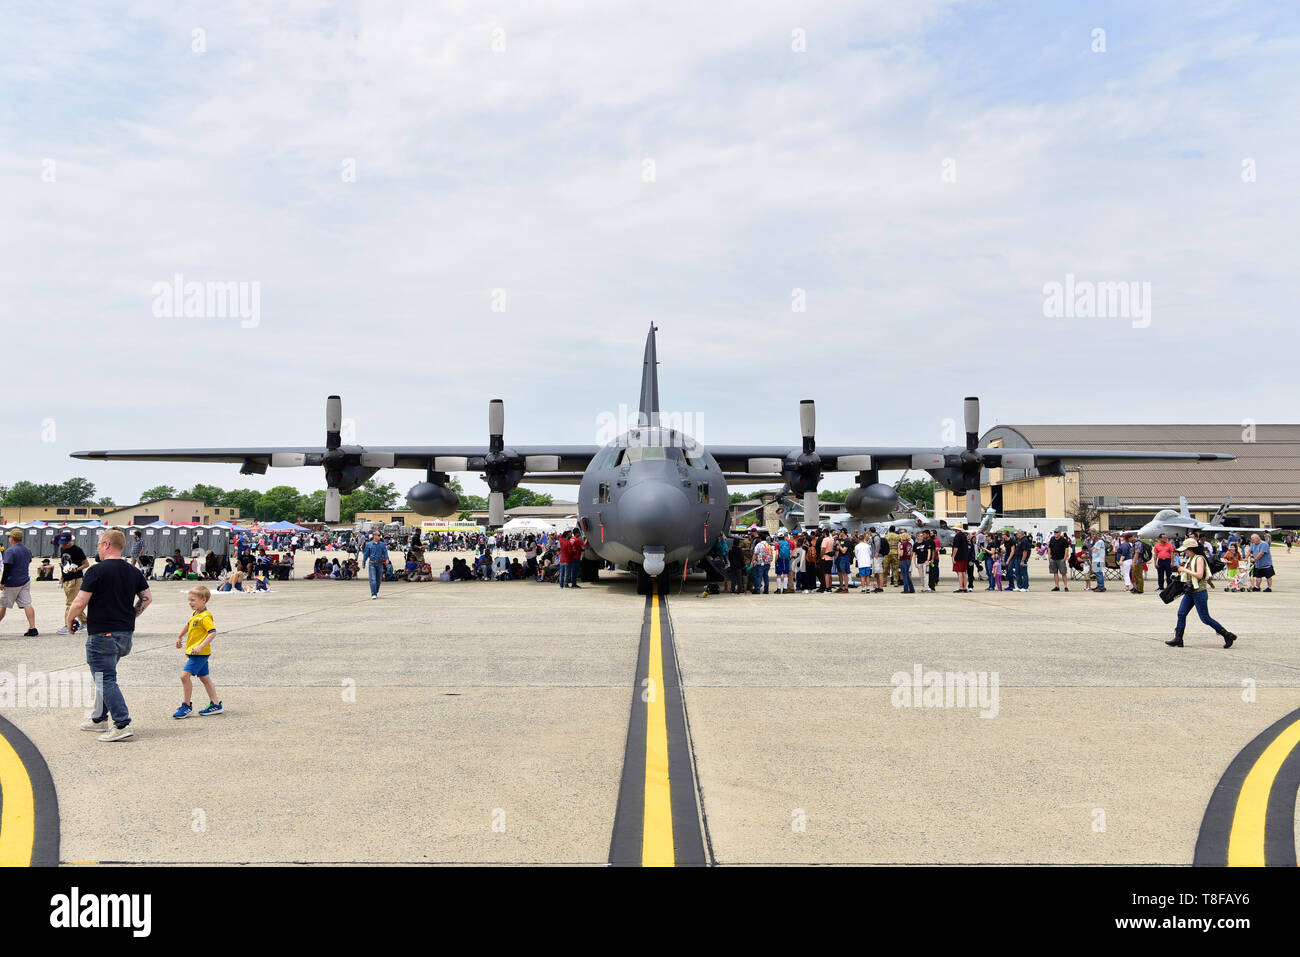 Guests in attendance at the 2019 “Legends in Flight” JBA Air & Space Expo tour an AC-130 on Joint Base Andrews, Md., May 11, 2019. The air show had more than 40 static displays or people to view inside and up close. (U.S. Air Force photo by Airman 1st Class Noah Sudolcan) Stock Photo